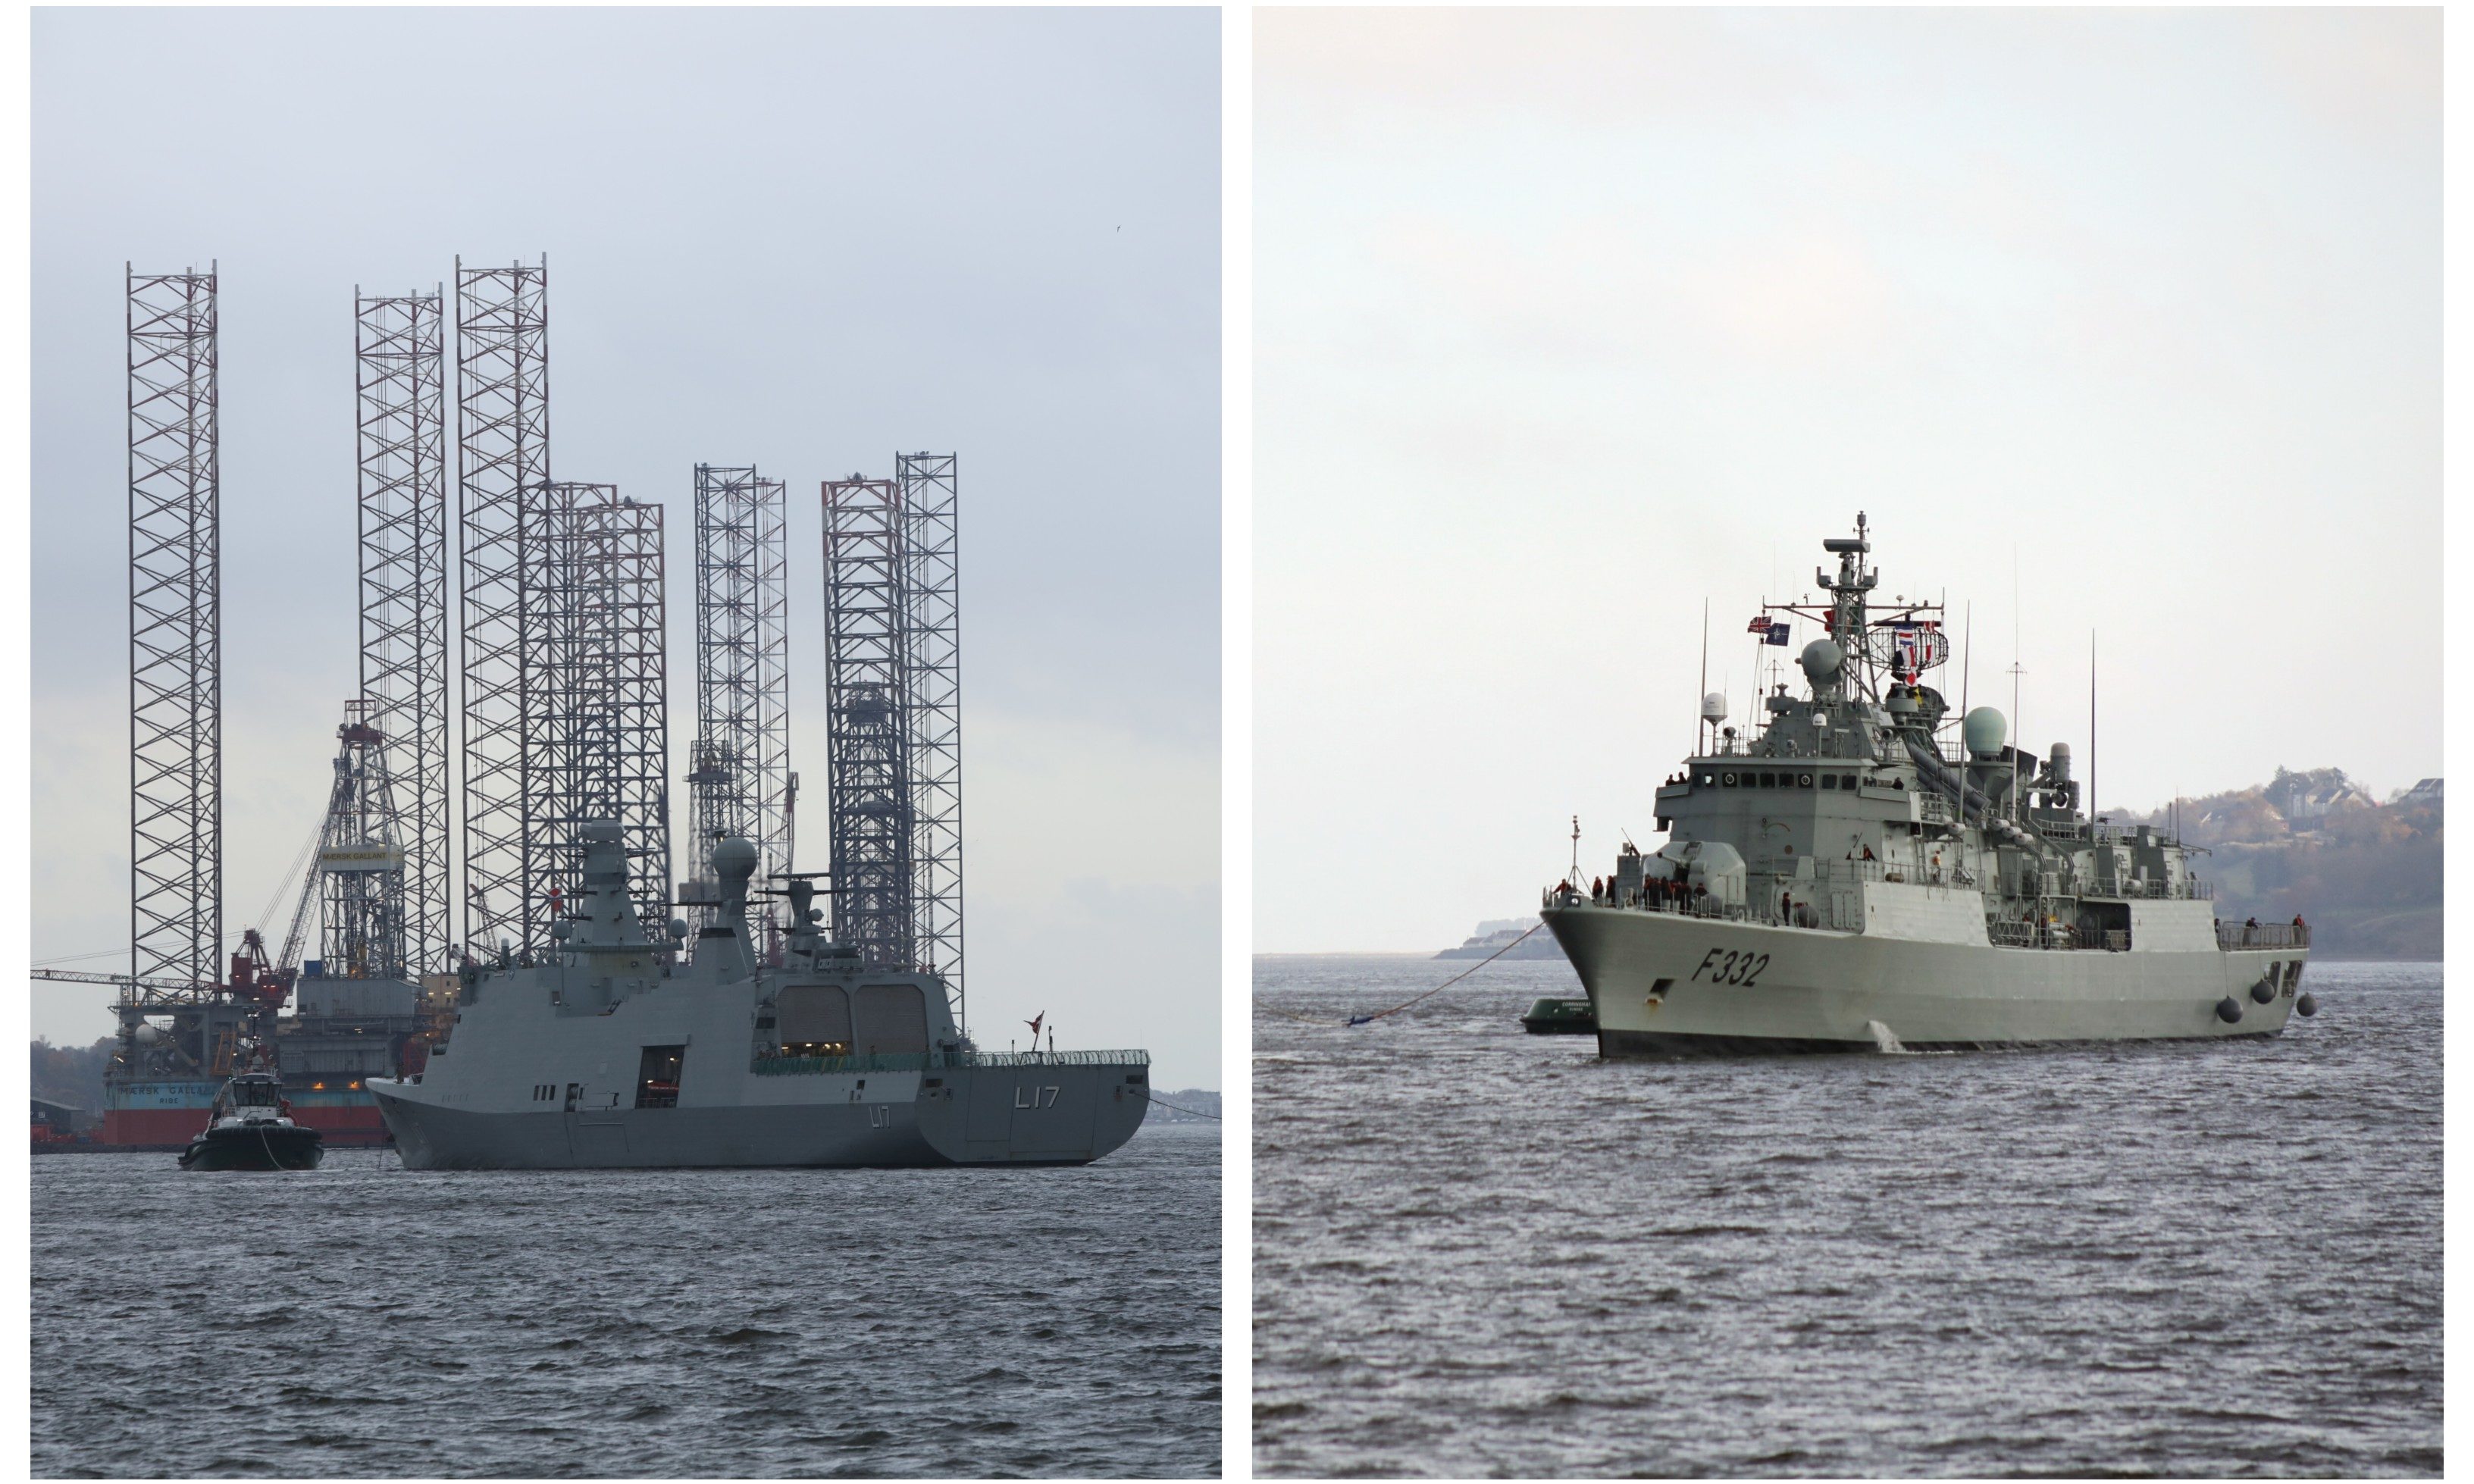 Two of the NATO warships arriving in Dundee.